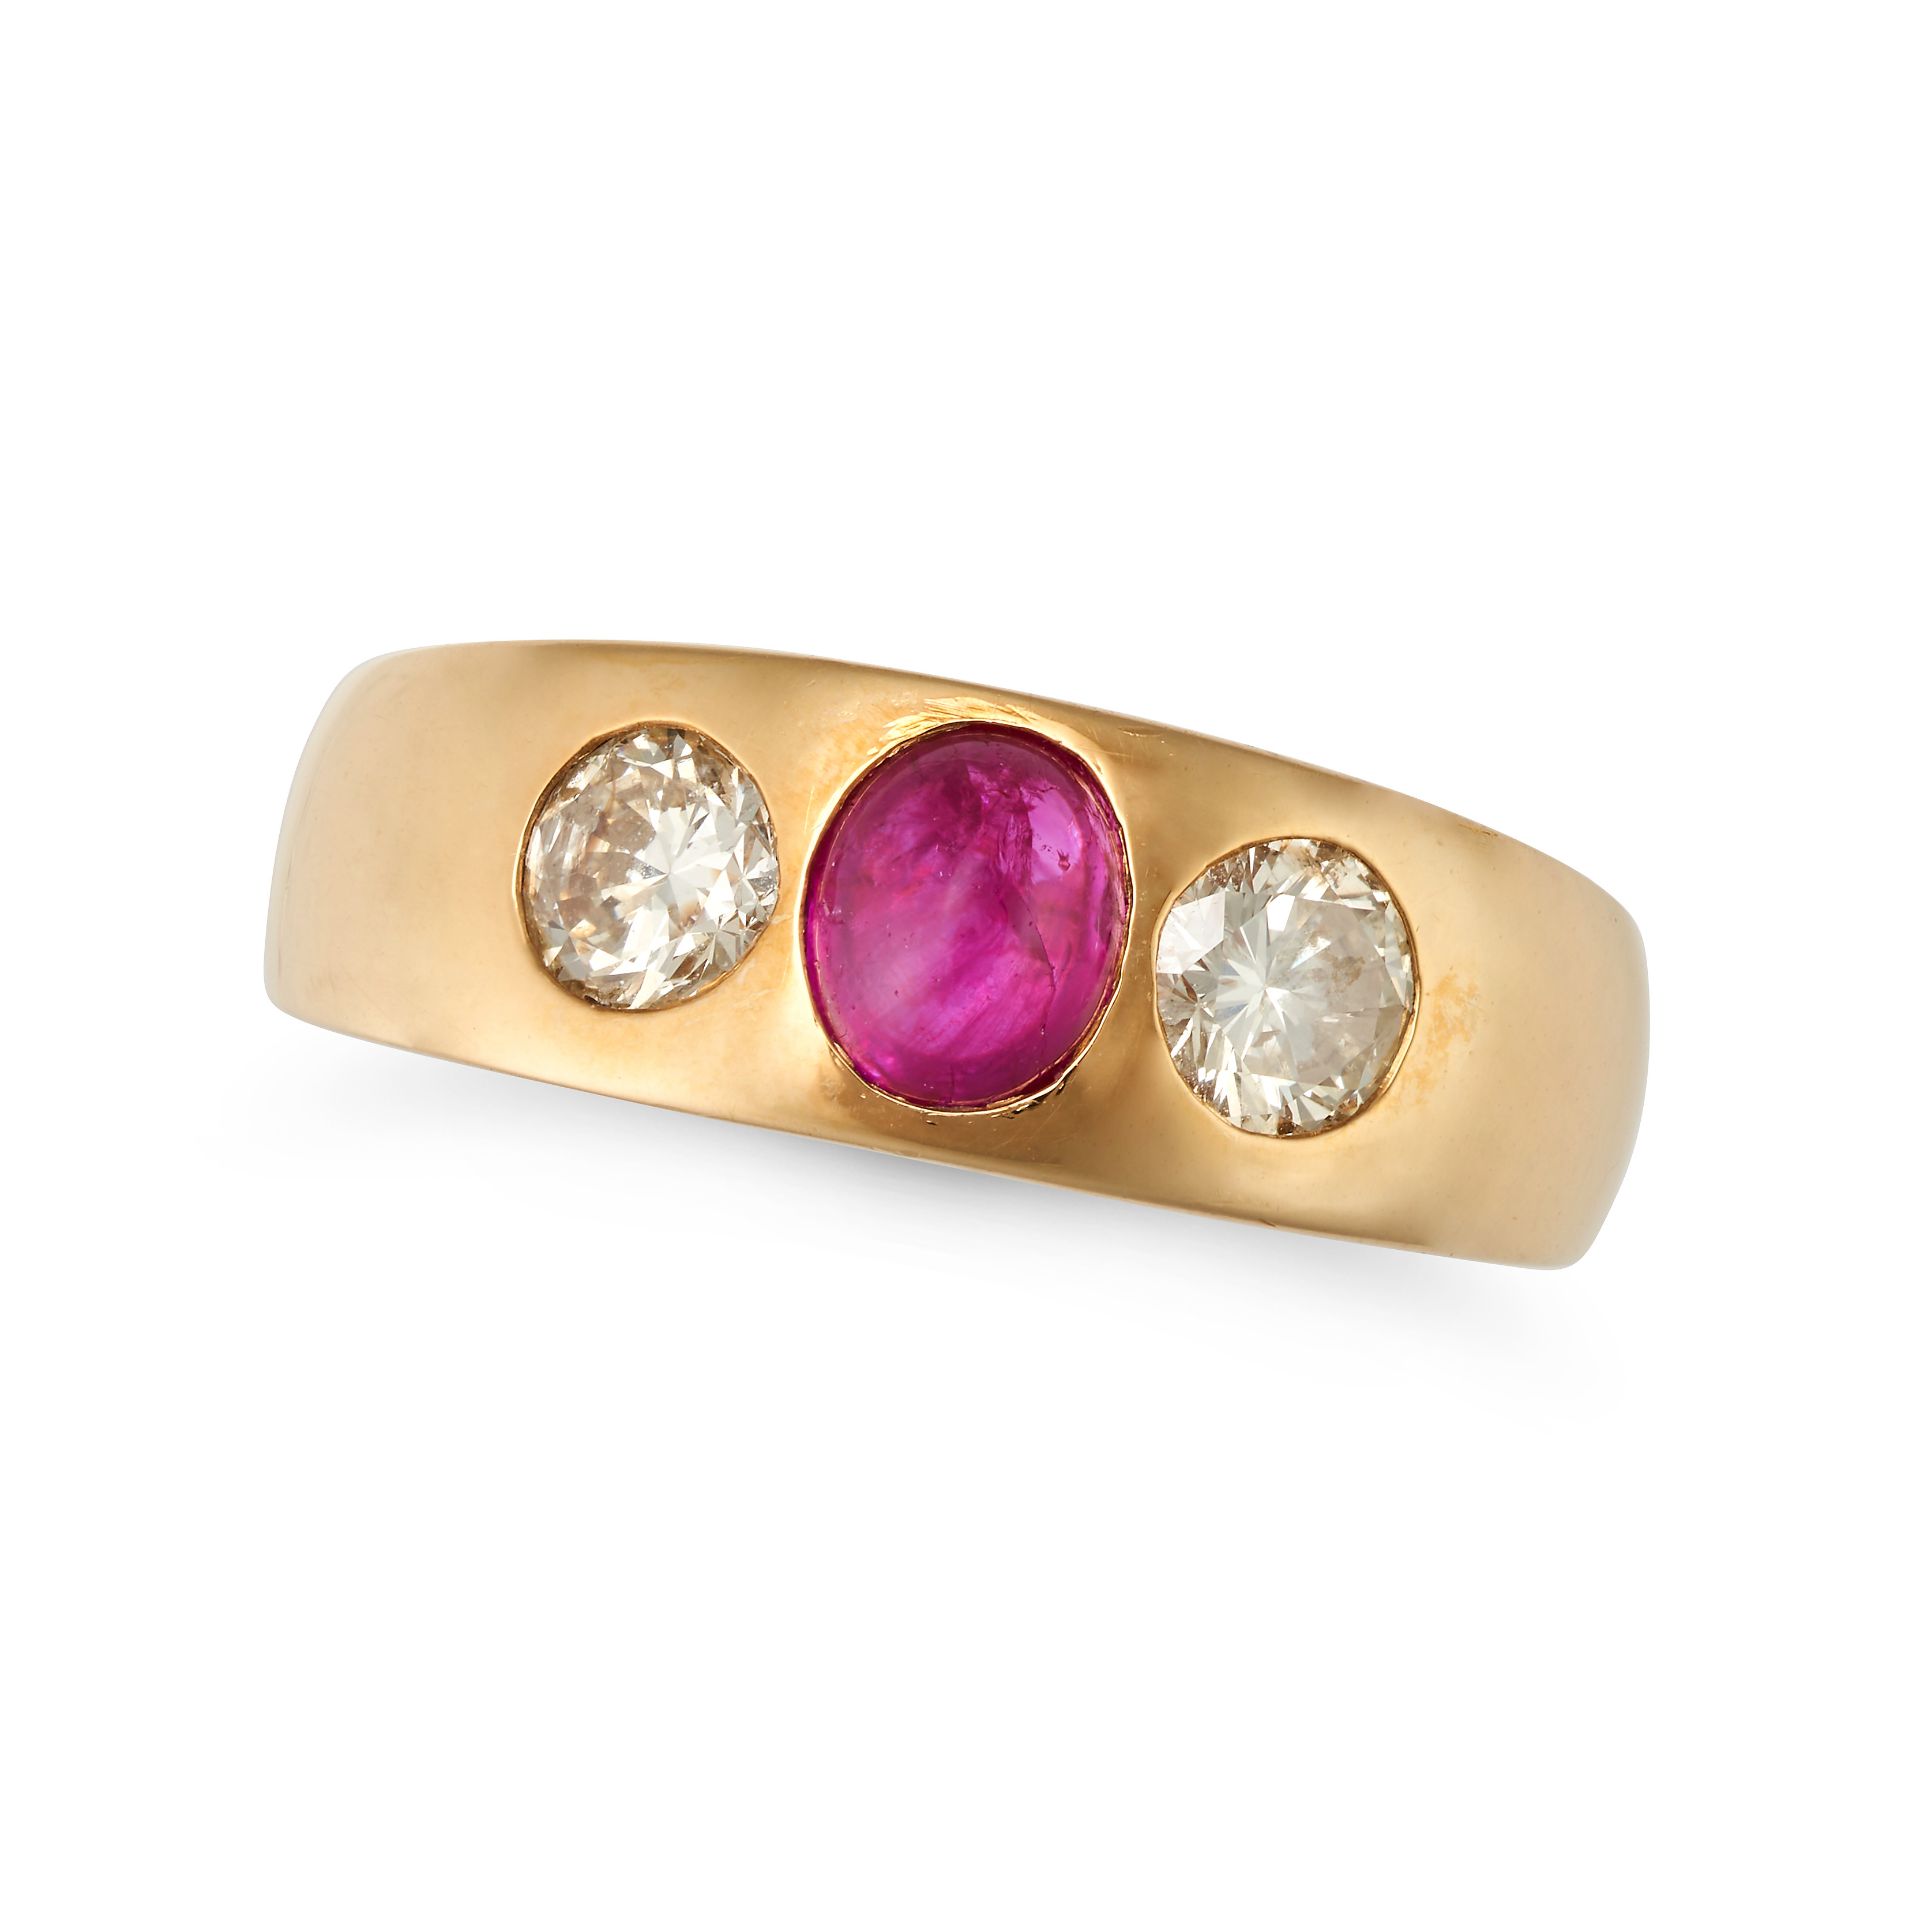 A RUBY AND DIAMOND GYPSY RING set with an oval cut ruby accented on each side by a round brillian...